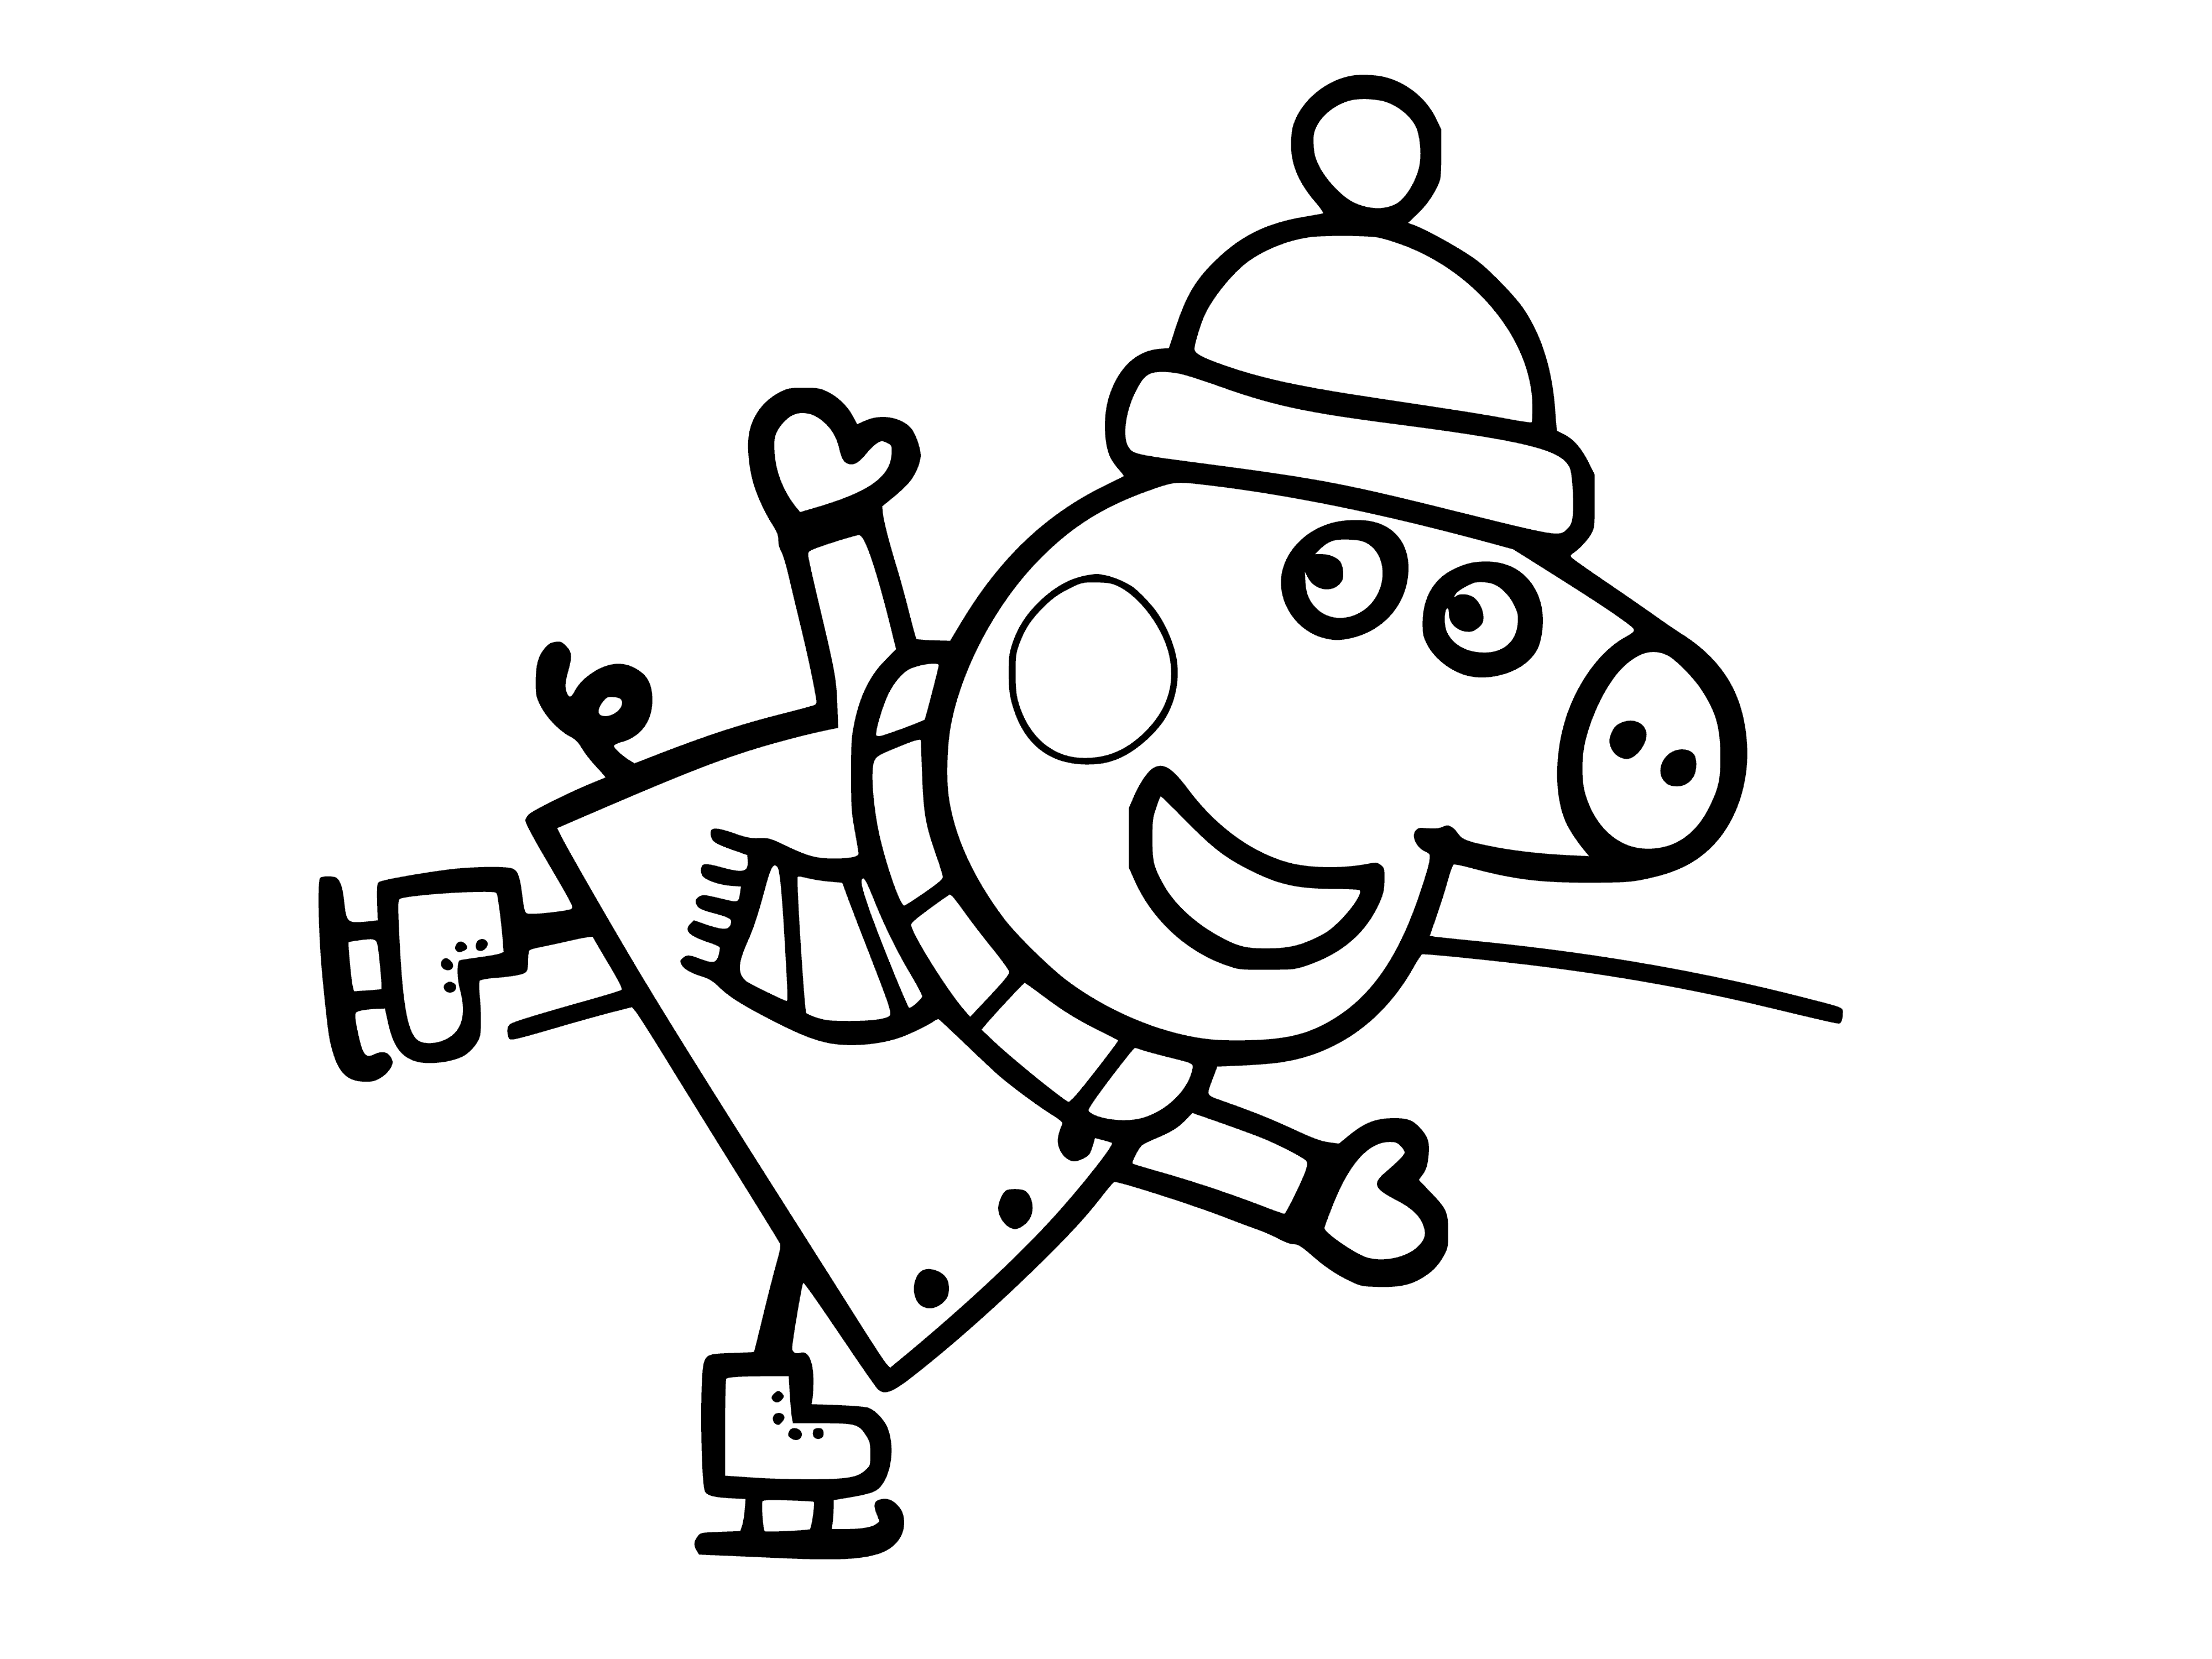 coloring page: Peppa Pig is skating on ice, dressed in pink with her hair in pigtails. She has a skate in her hand and is surrounded by snow.